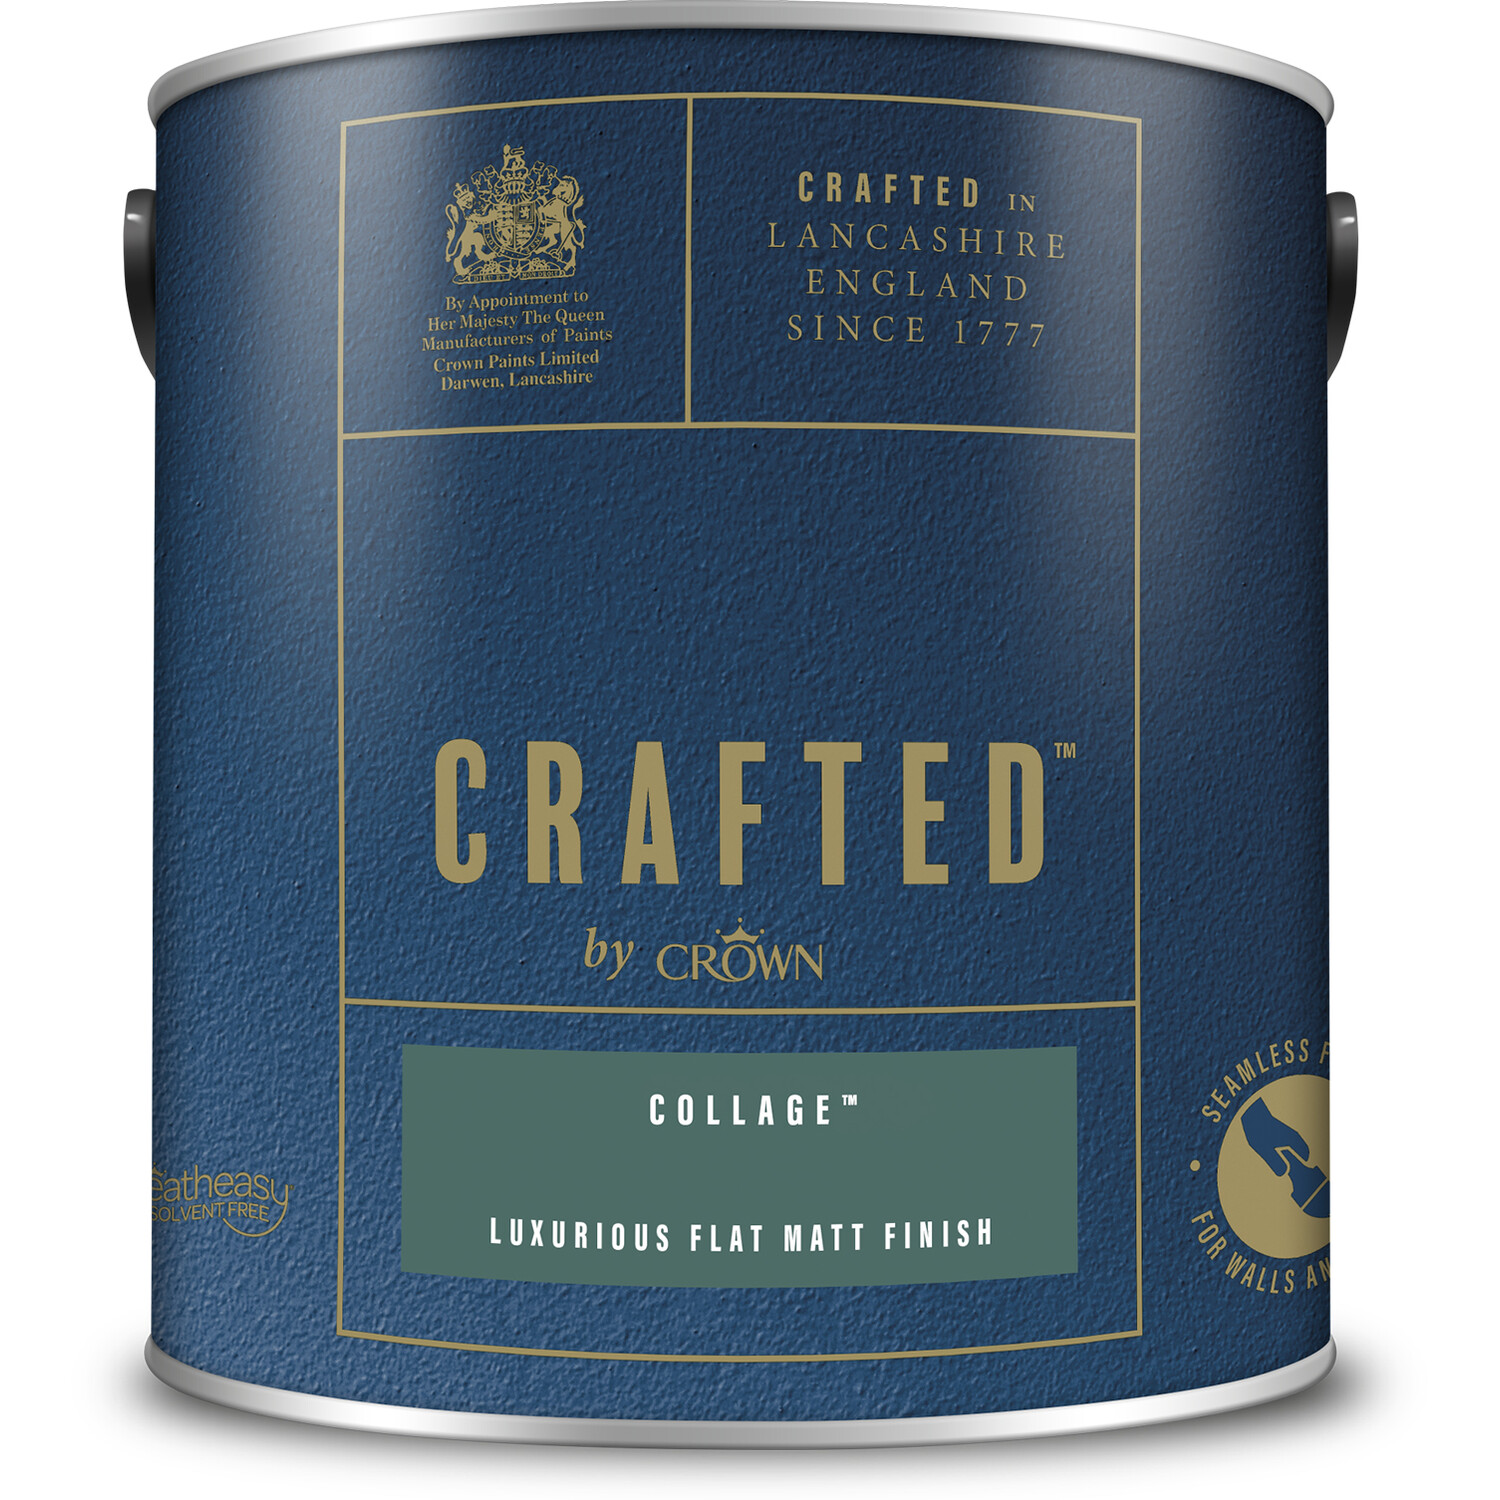 Crown Crafted Walls and Wood Collage Luxurious Flat Matt Paint 2.5L Image 2